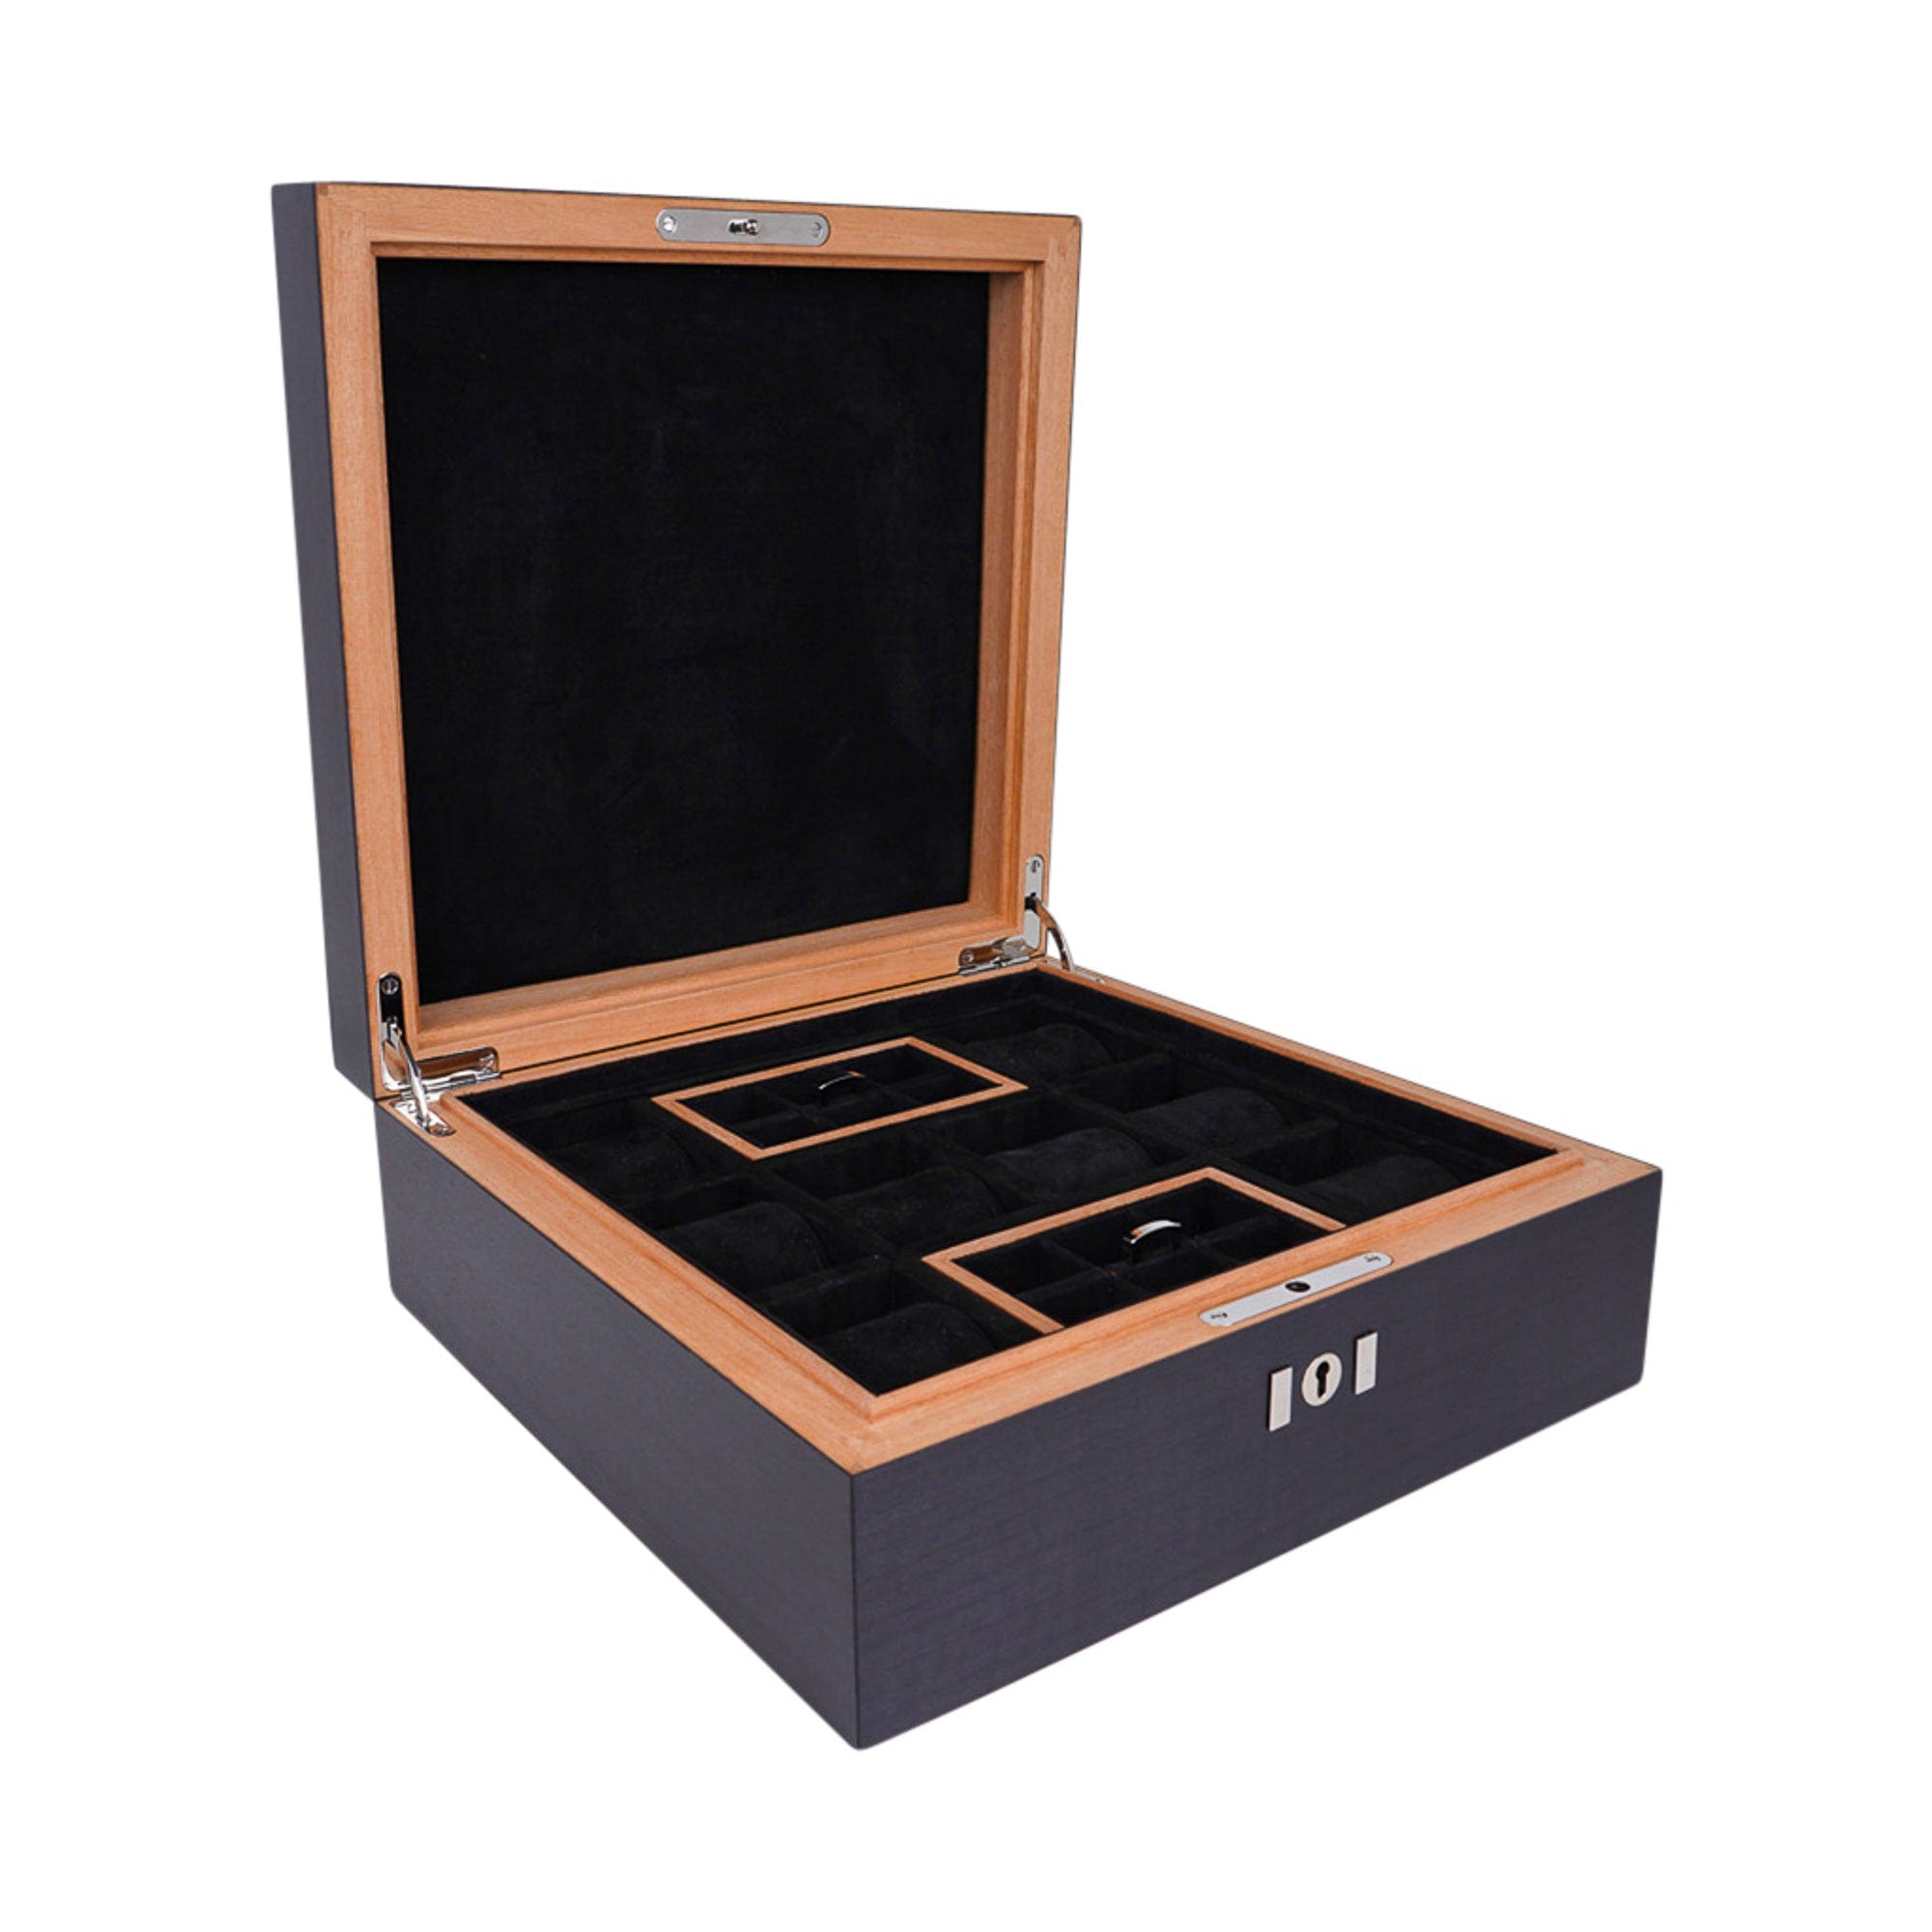 Authentic HERMES Leather & Wood Presentation Watch Box w